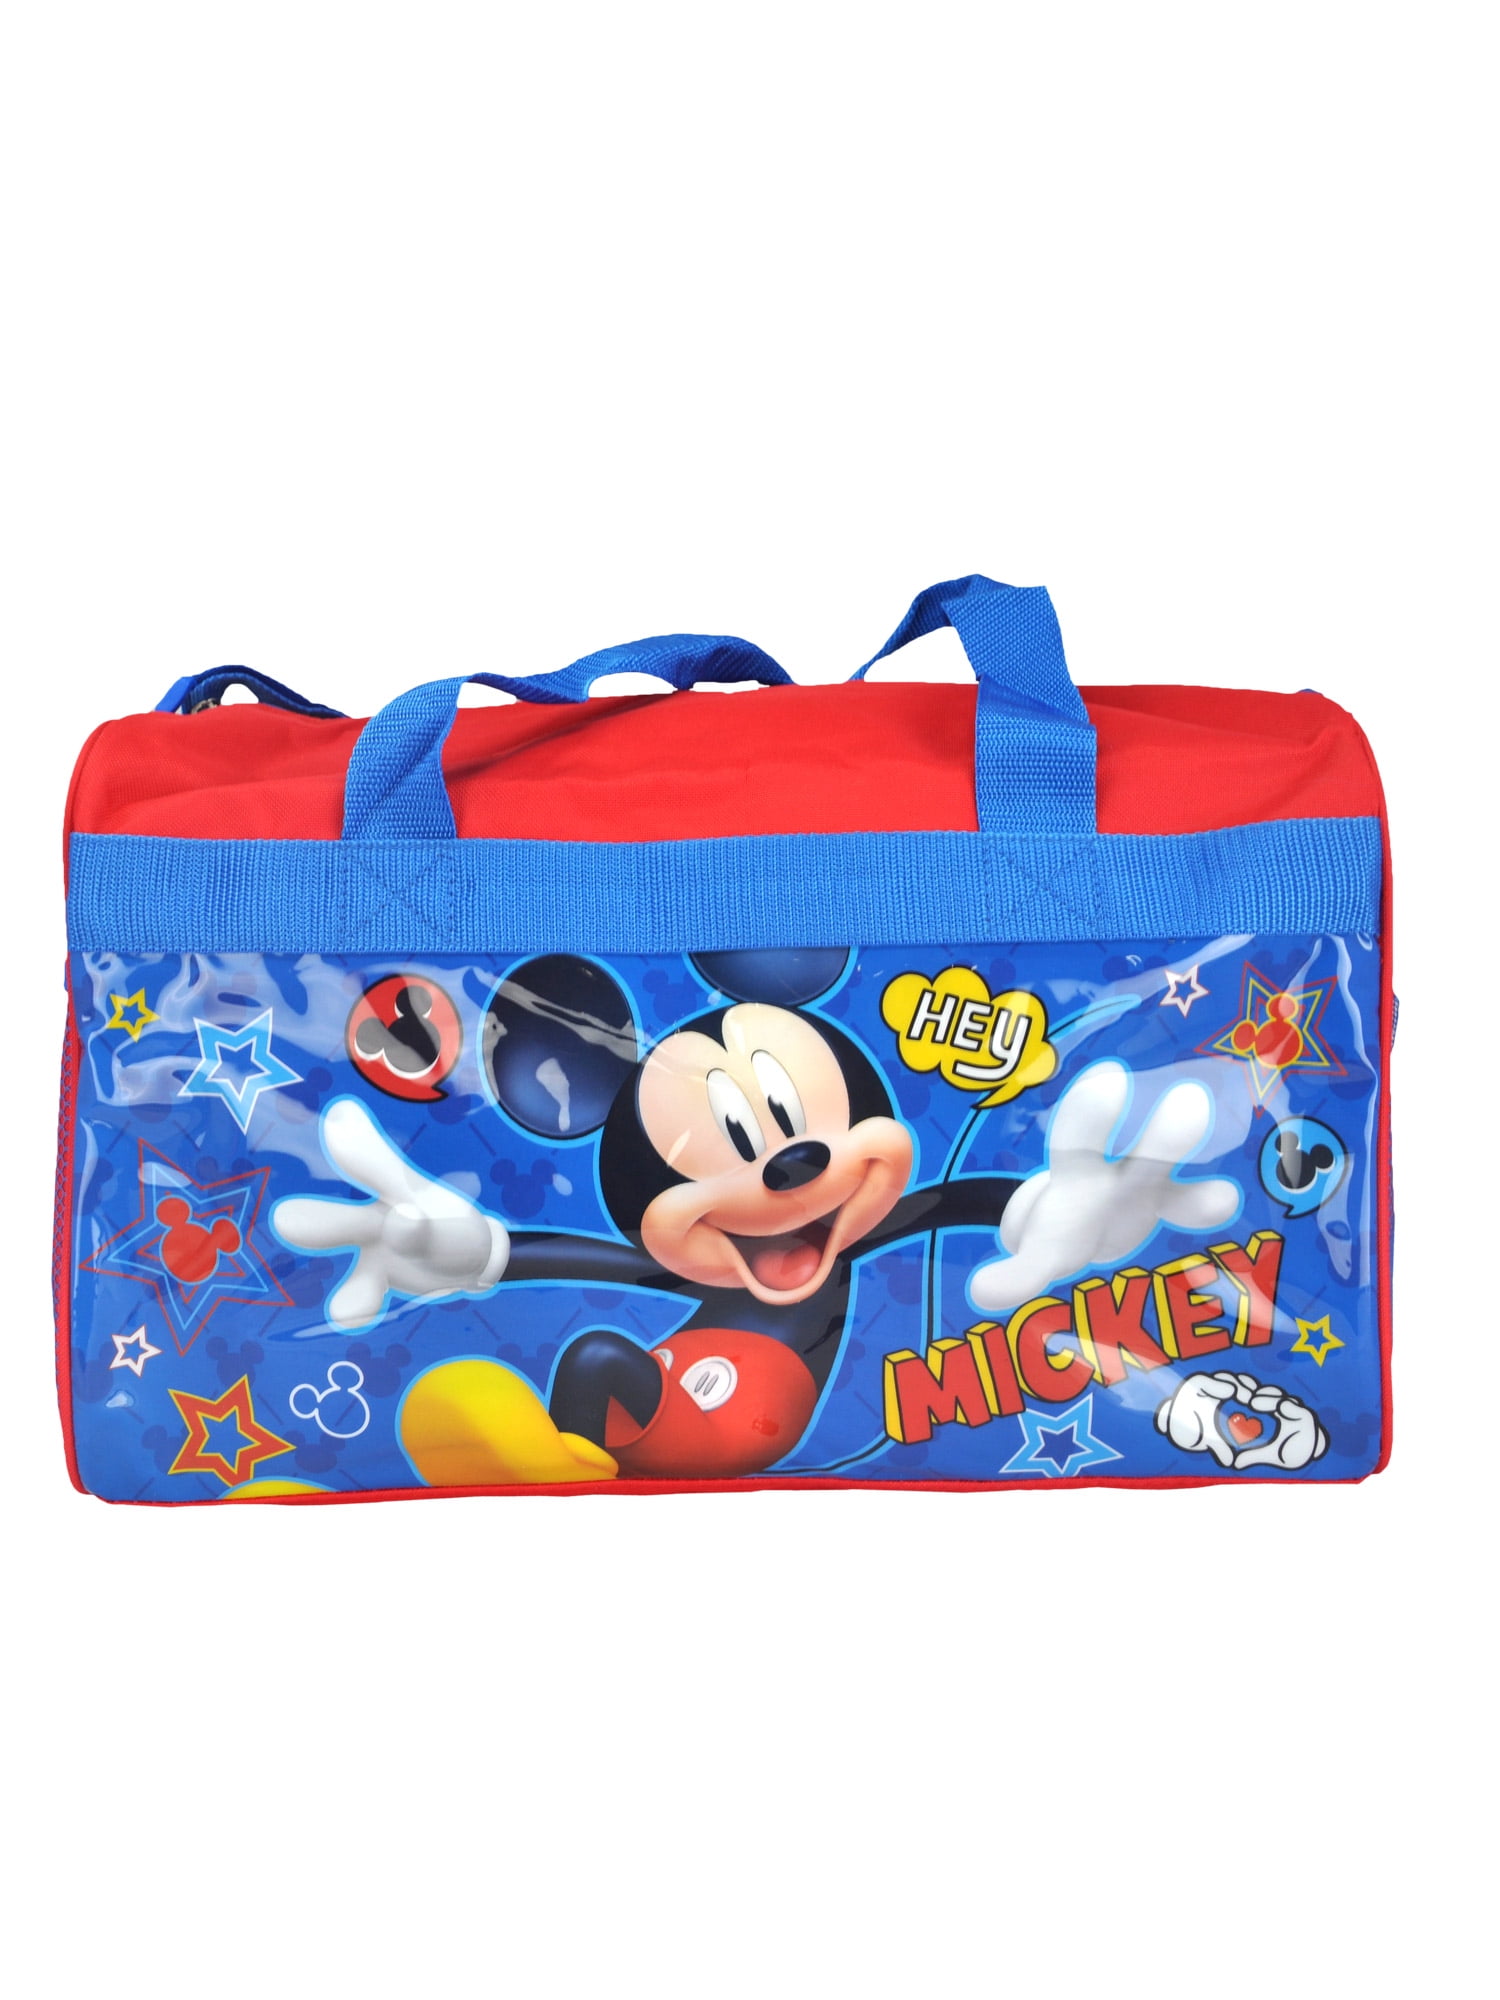 Meirdre Travel Duffel Bag Cartoon Minnie Mouse Lightweight Large Capacity Portable Luggage Bag Weekender Bag Overnight Carry-on Tote